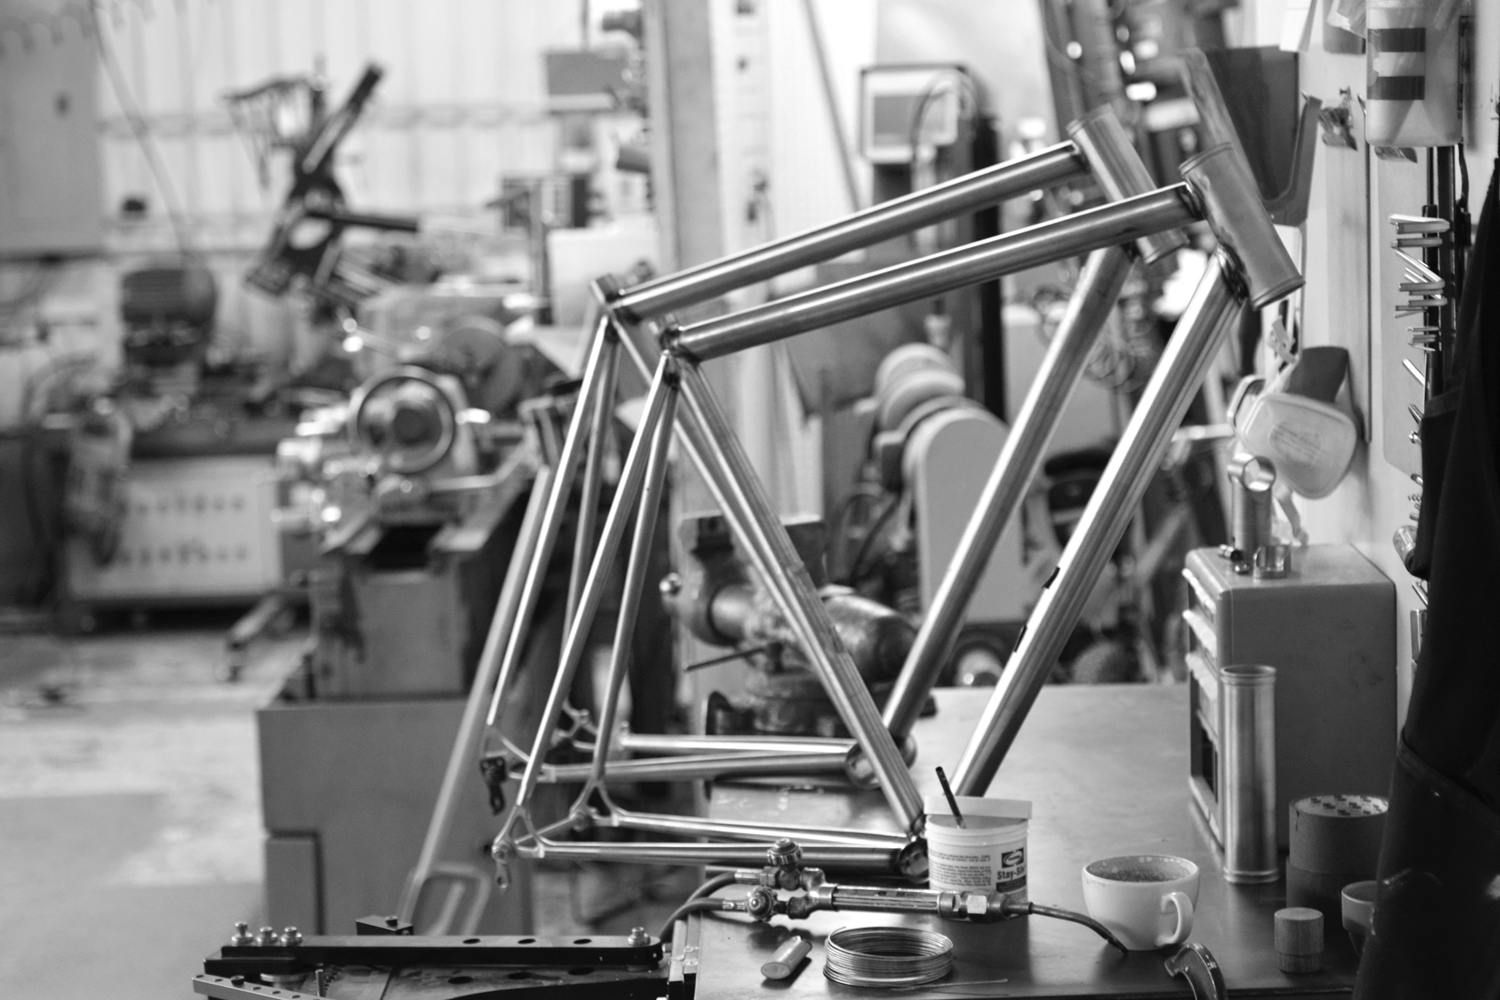 Inside the shop of Moasic Custom Bicycles